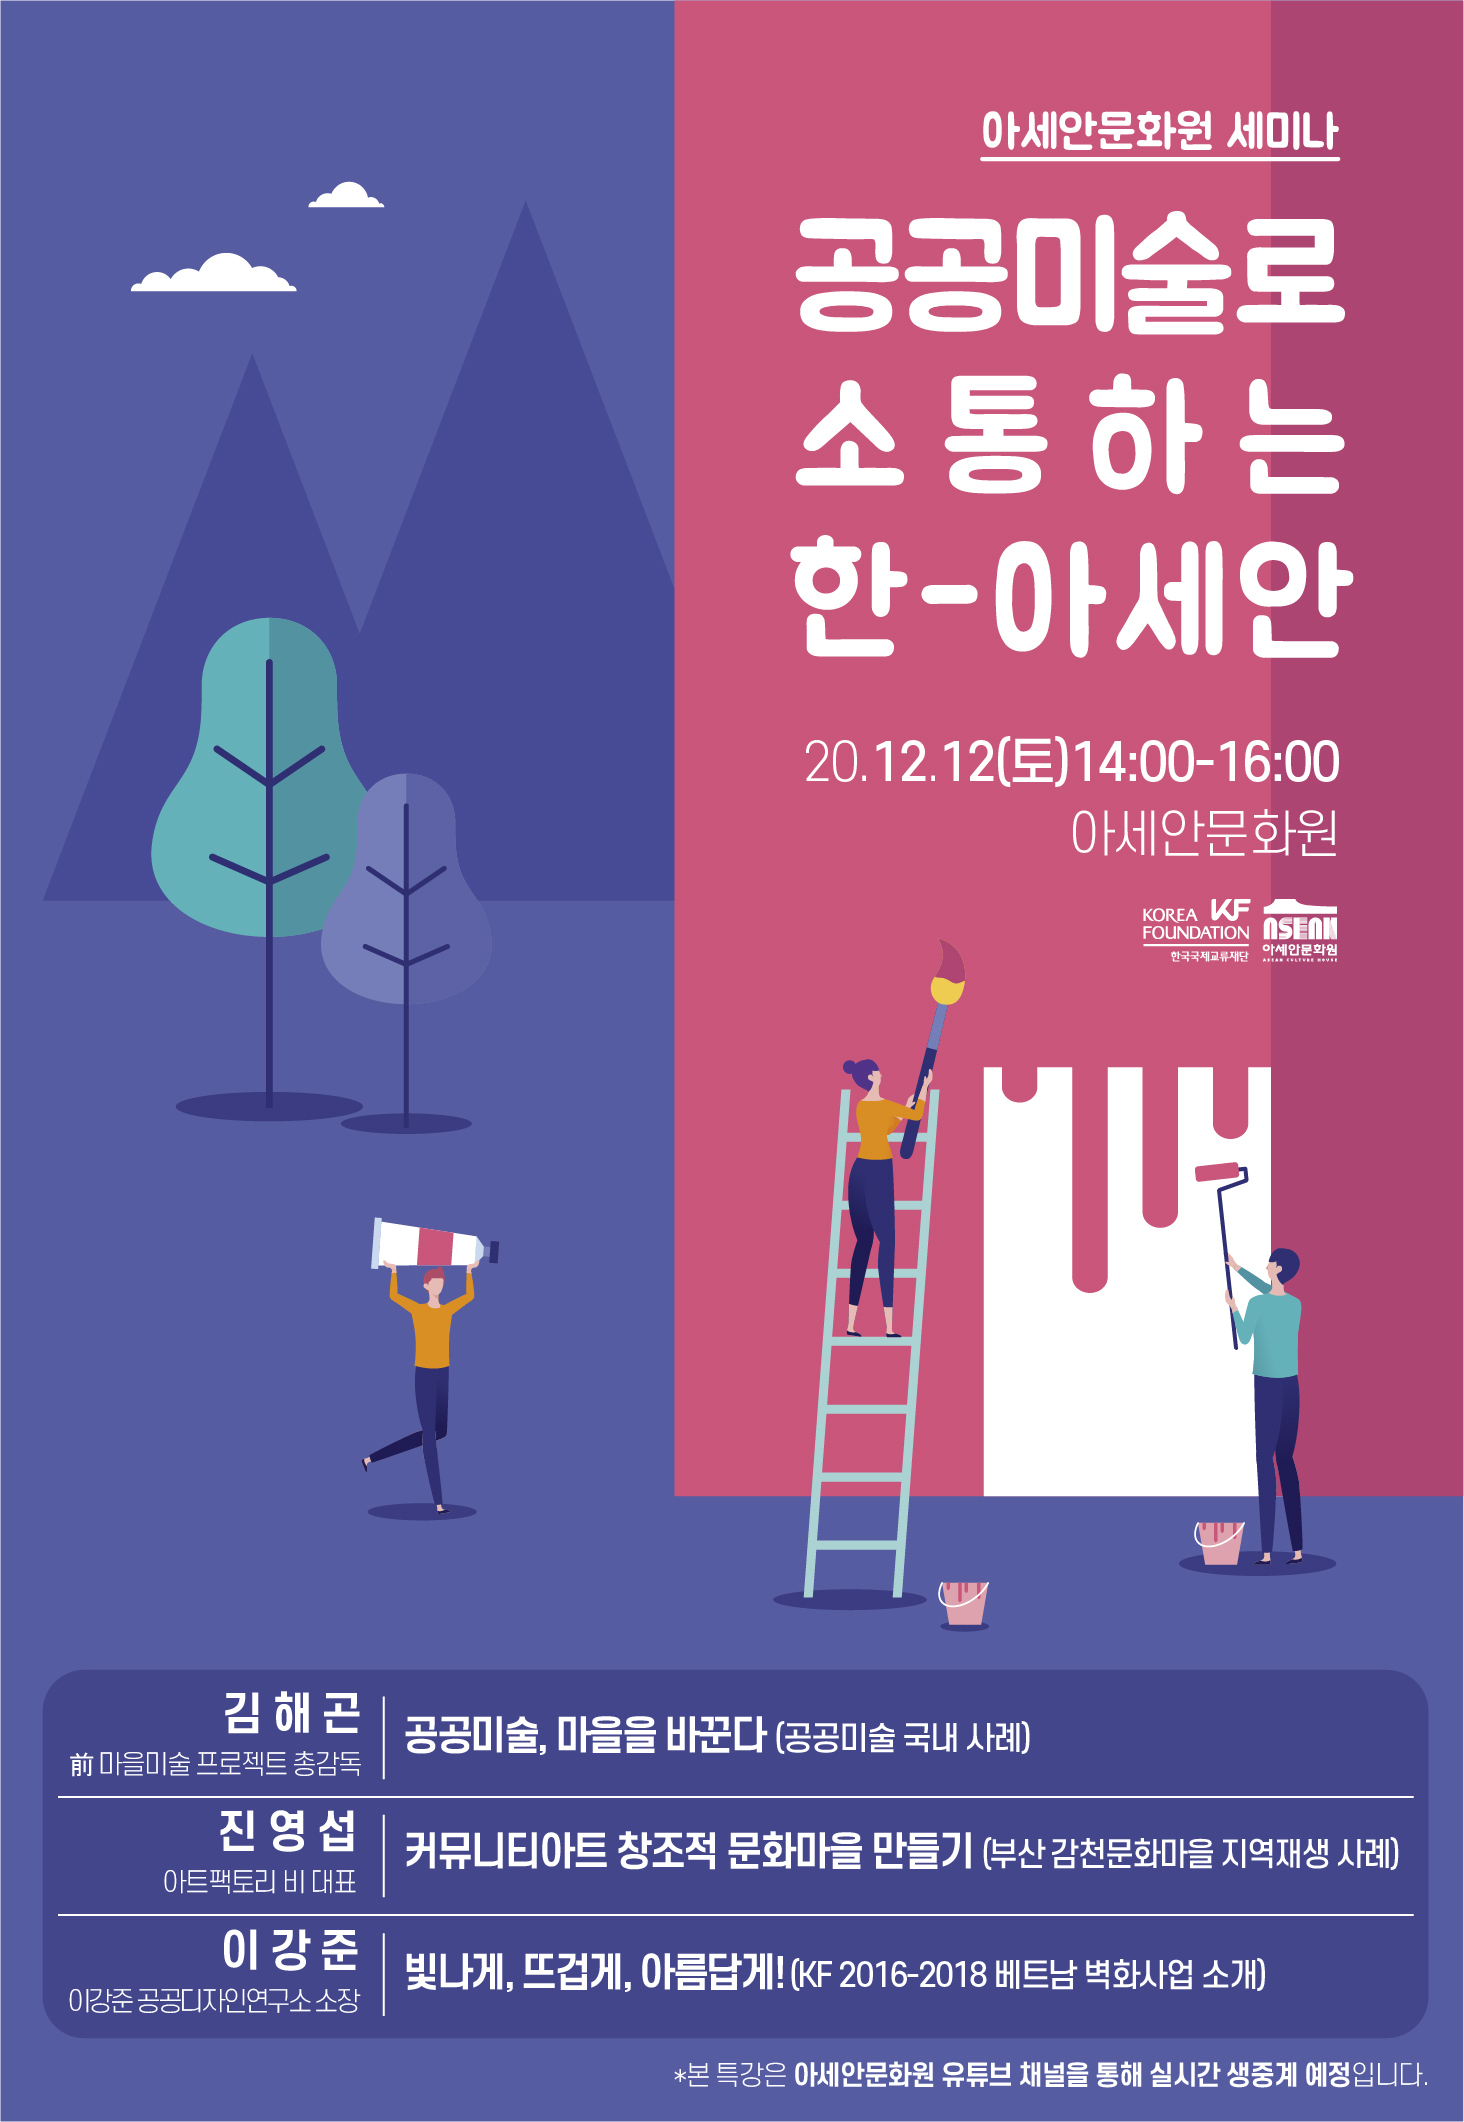 Public Art Projects in Korea and ASEAN